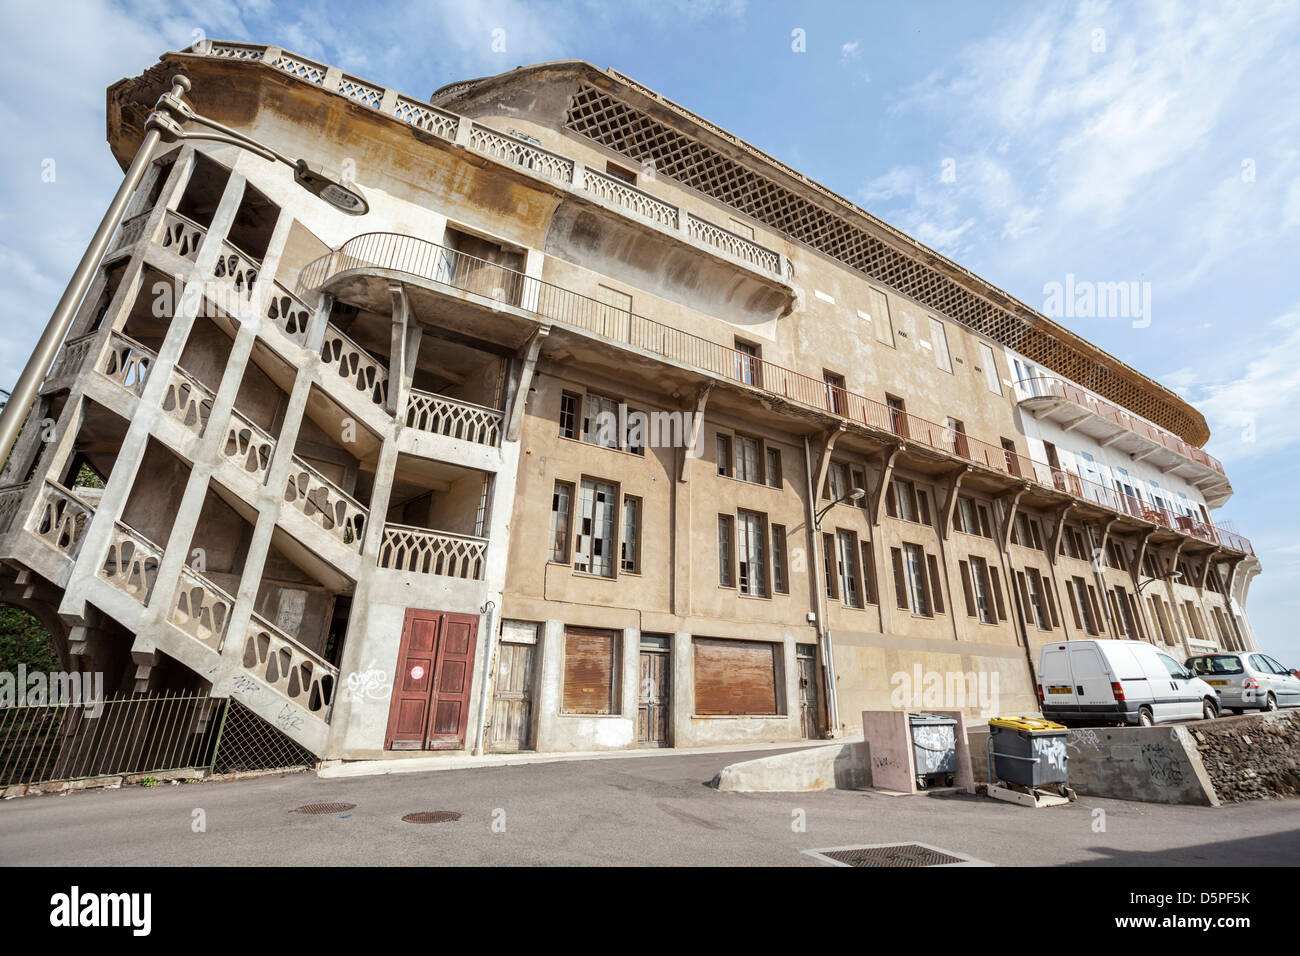 Hotel Belvedere du rayon vert in Cerbere,Languedoc-Roussillon, Francia. Foto Stock